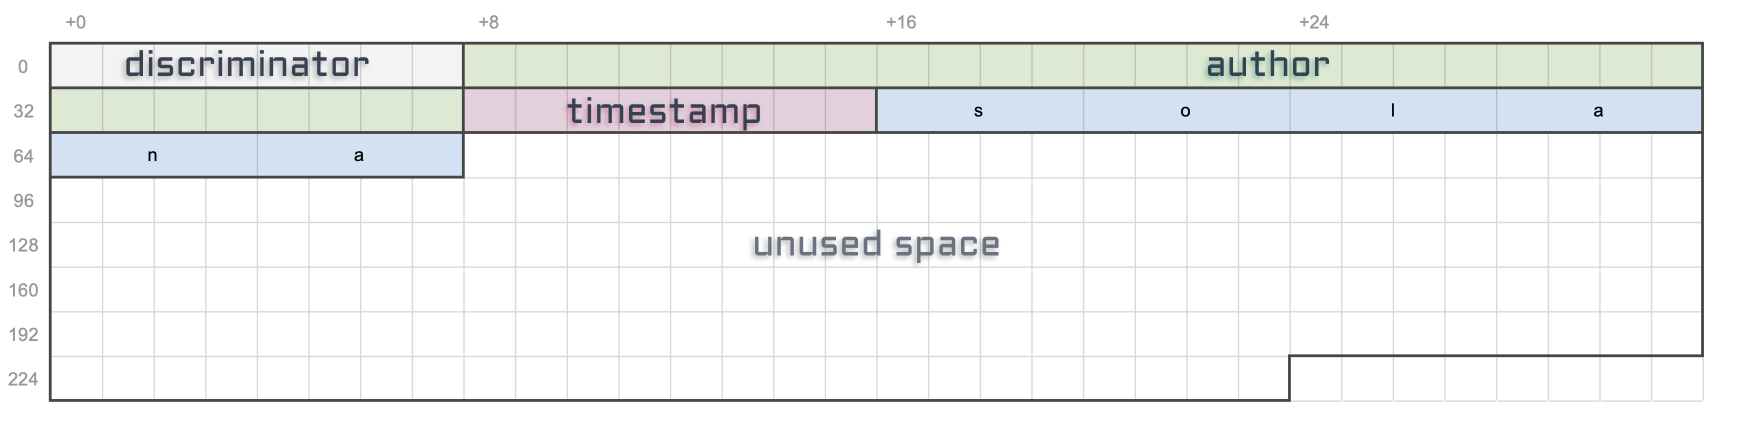 Same table as before but with 24 bytes highlighted as the topic and the rest being marked as "unused storage".